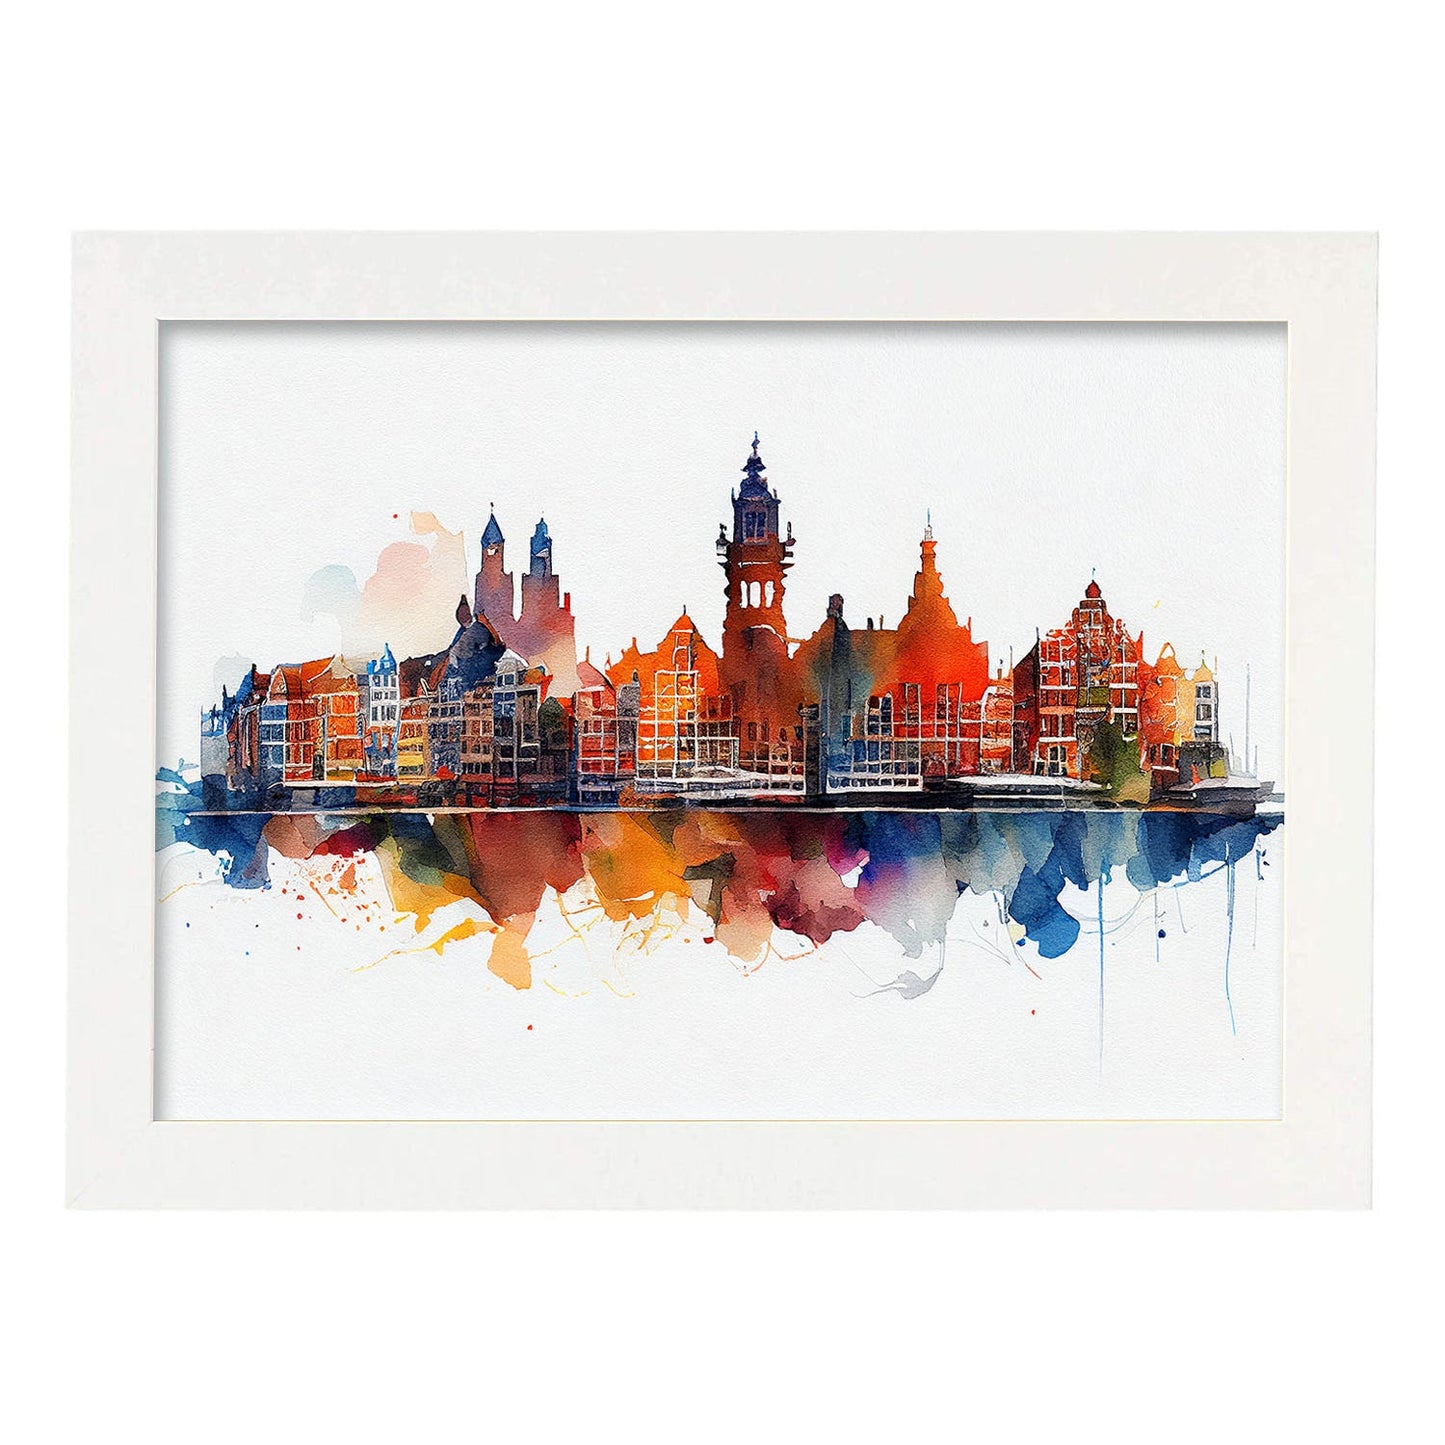 Nacnic watercolor of a skyline of the city of Amsterdam_4. Aesthetic Wall Art Prints for Bedroom or Living Room Design.-Artwork-Nacnic-A4-Marco Blanco-Nacnic Estudio SL